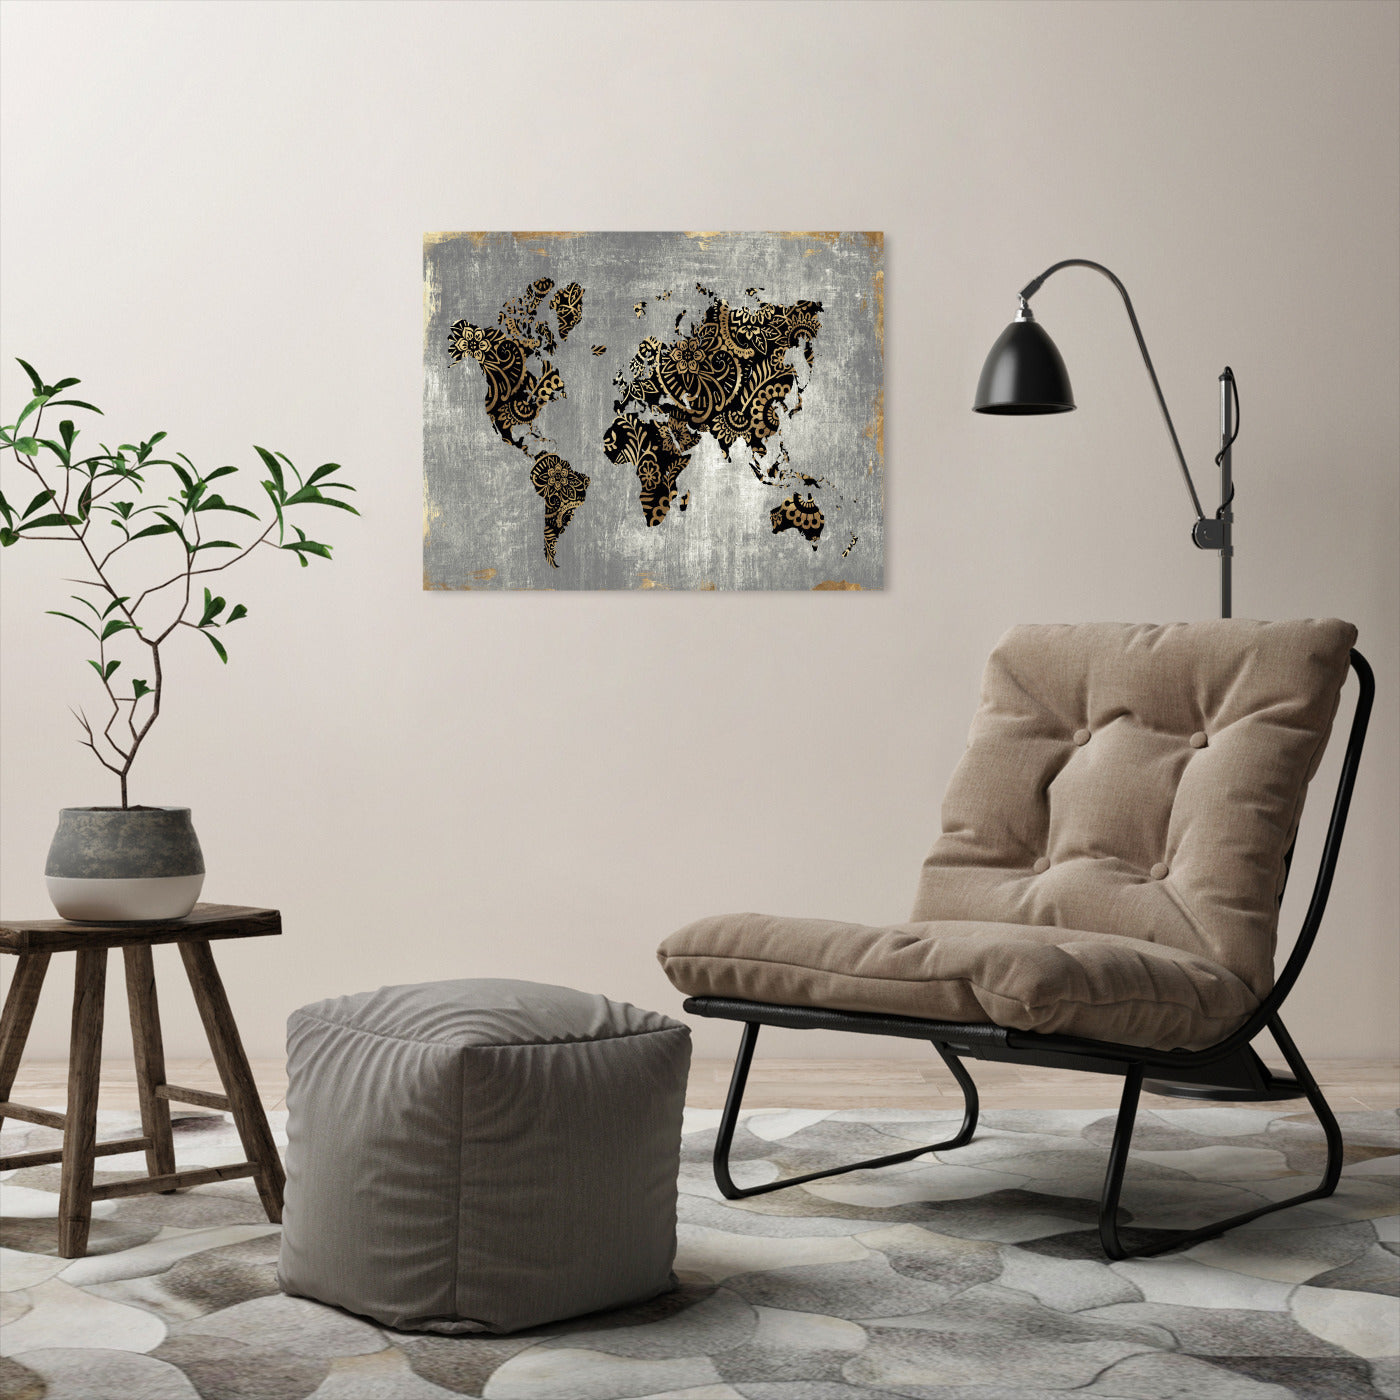 Gold World Map by PI Creative Art - Wrapped Canvas - Americanflat